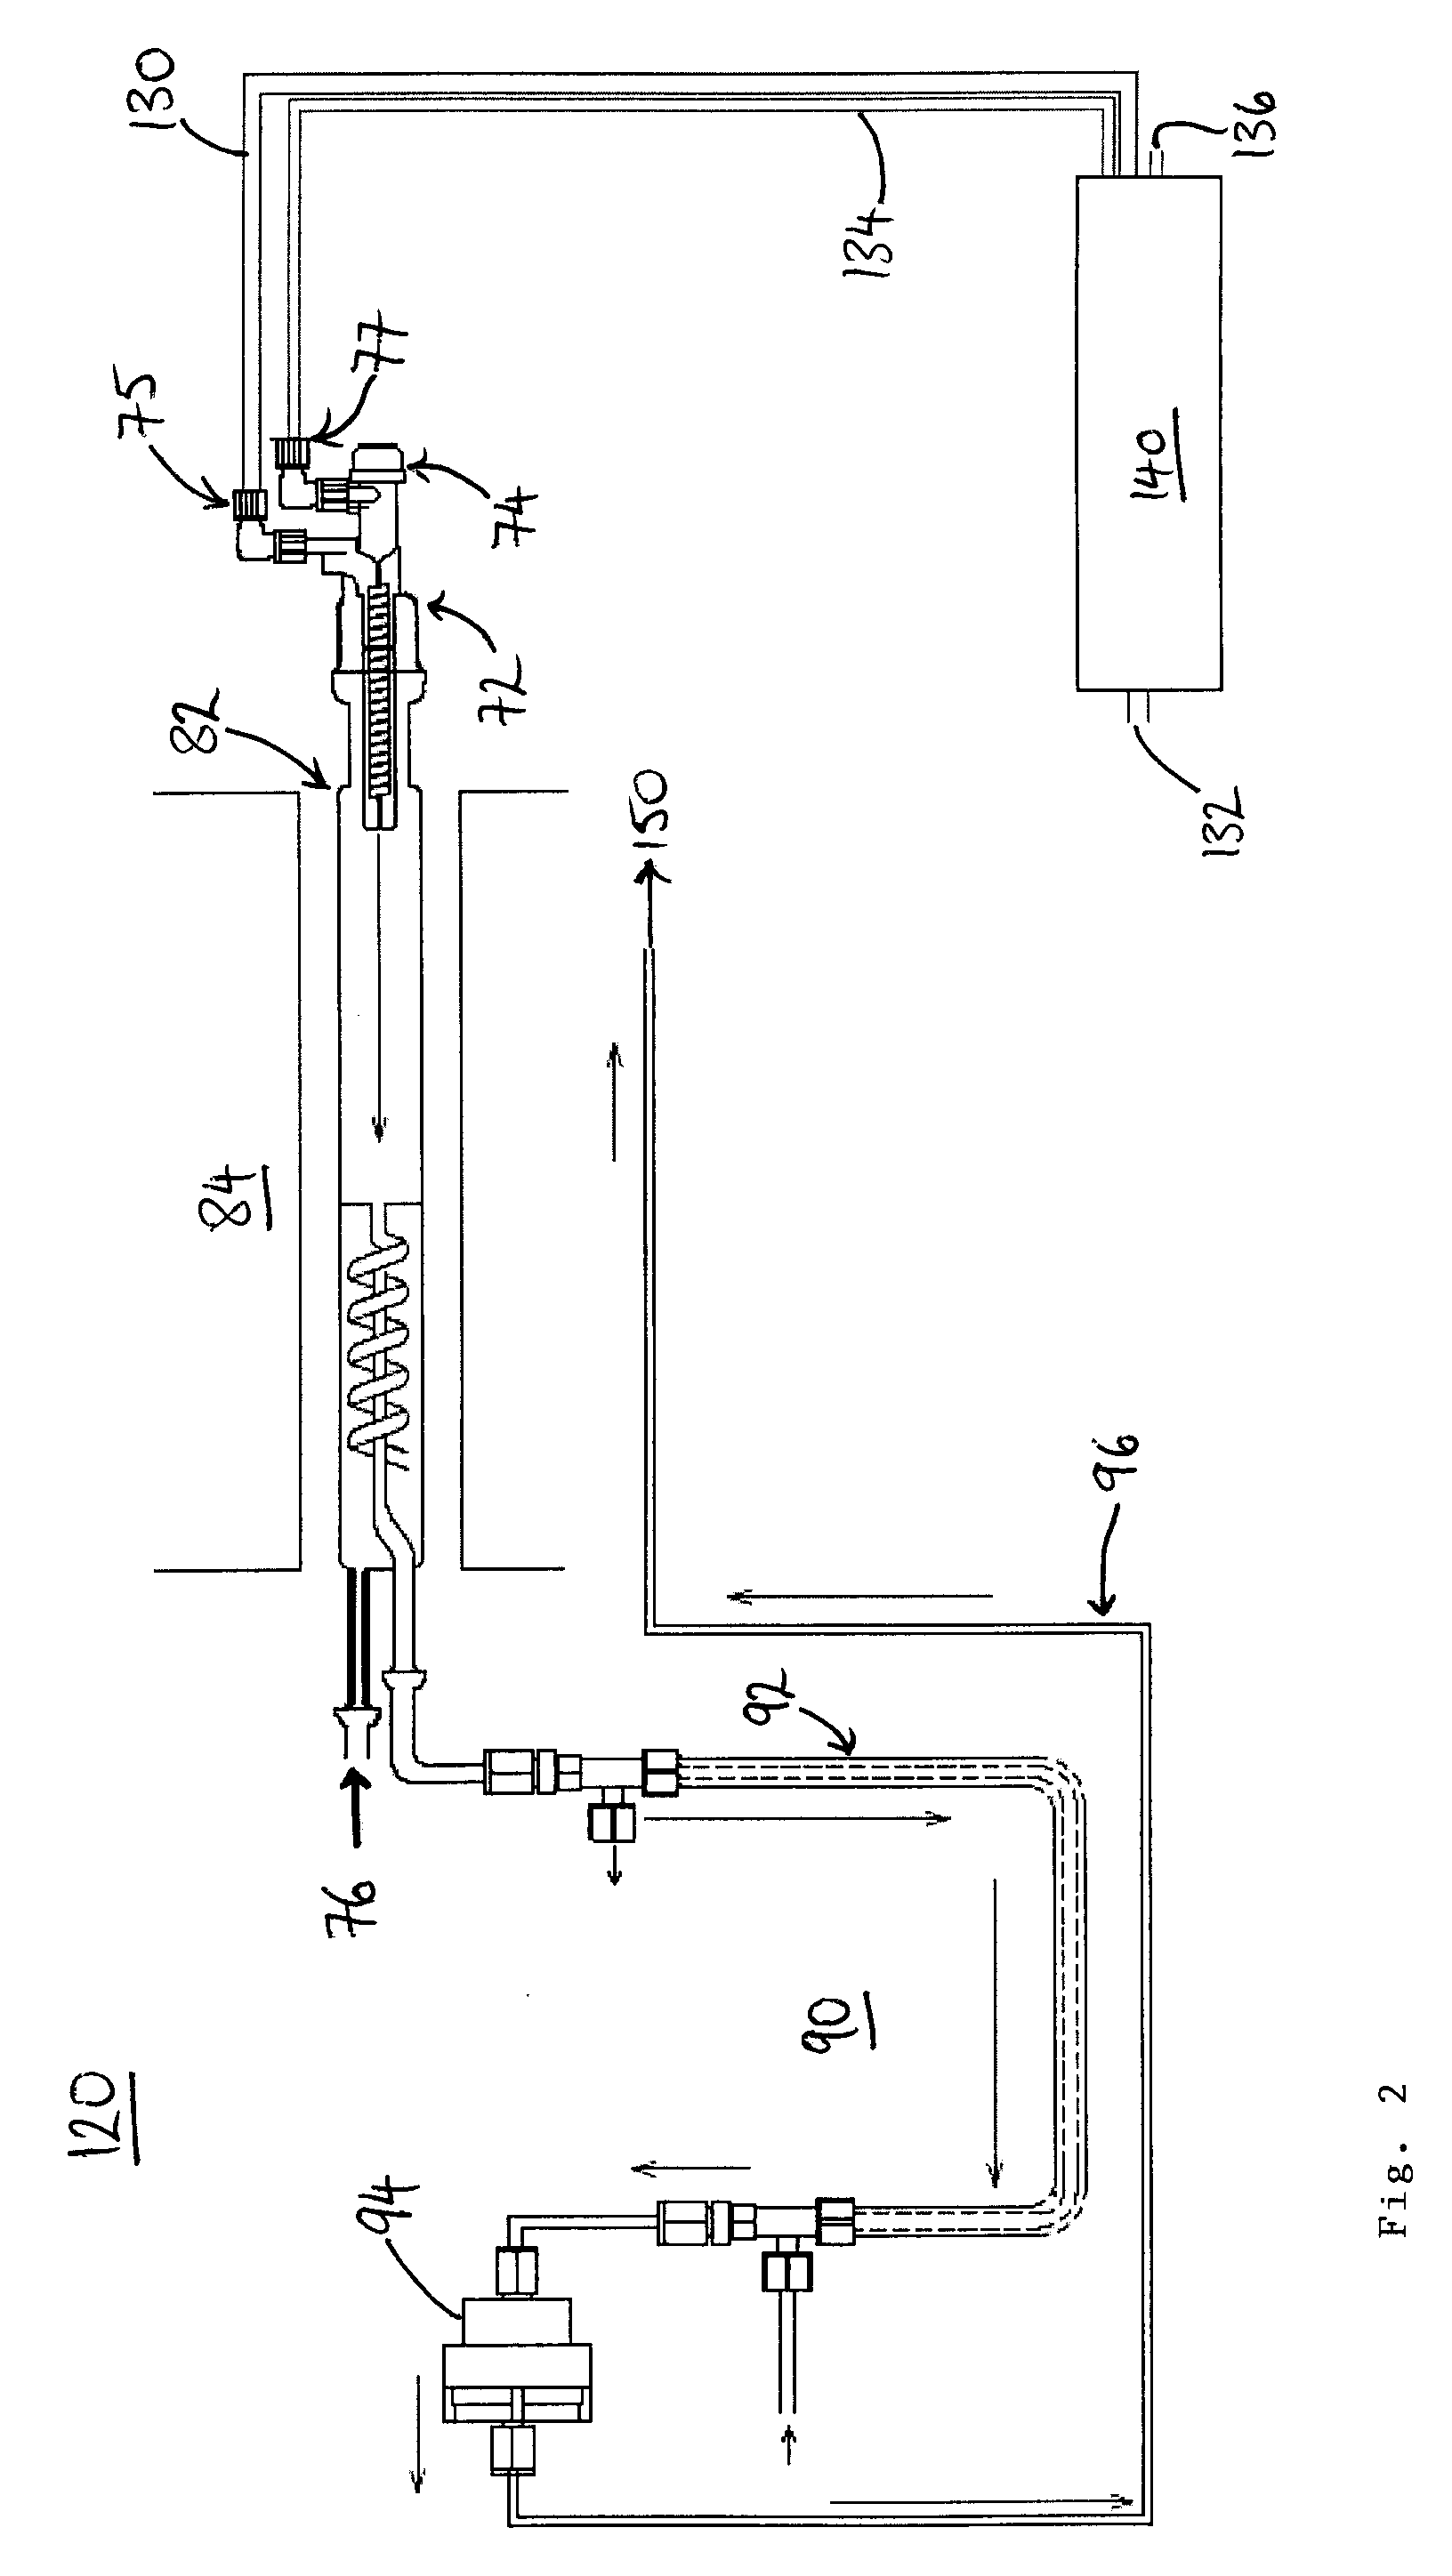 Apparatus and method for generating nitrogen oxides